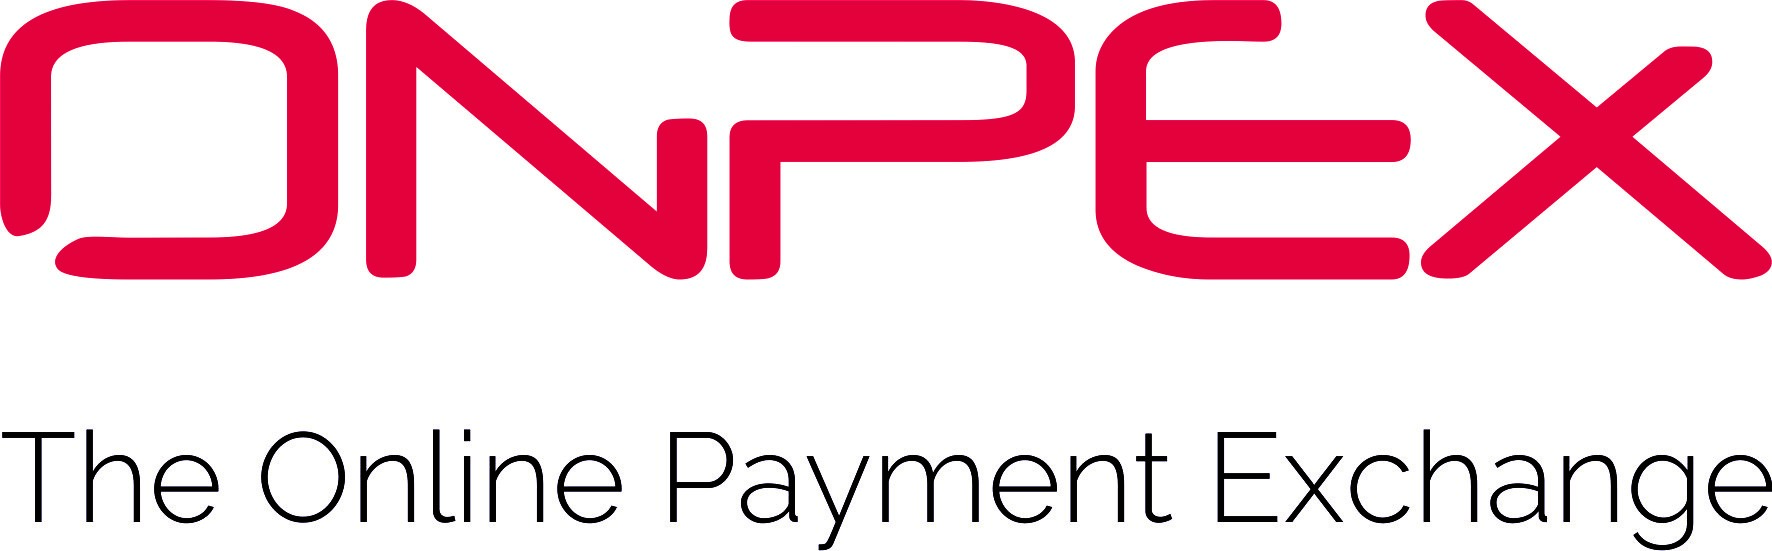 ONPEX and OnerWay Partner to Deliver Seamless Marketplace Settlements